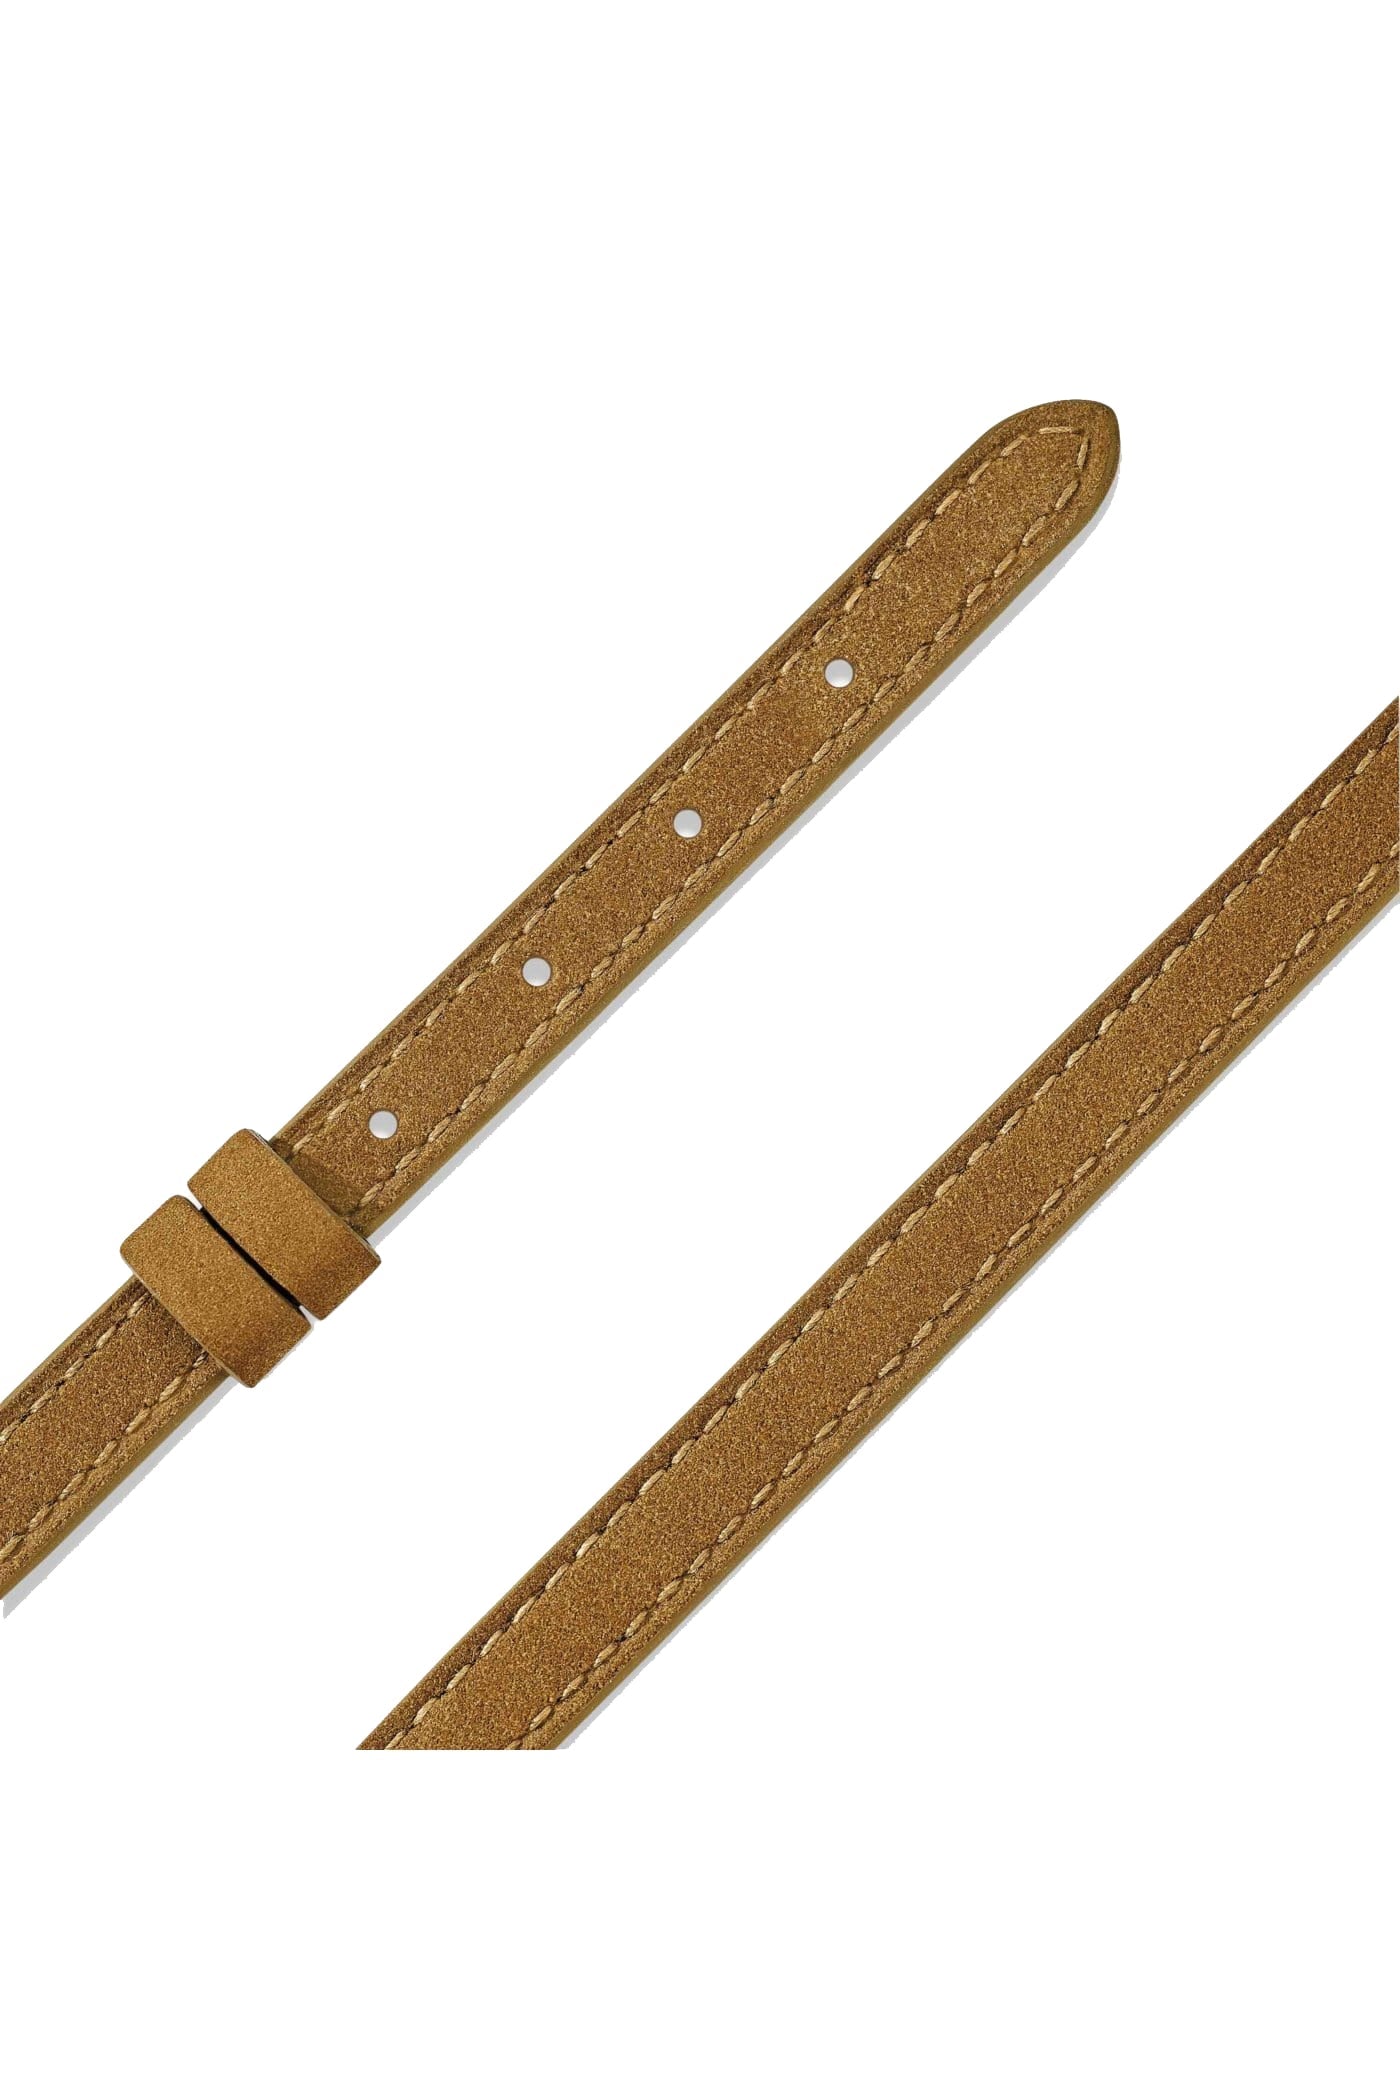 MESSIKA-My Move Leather Bracelet - Tobacco-TOBACCO